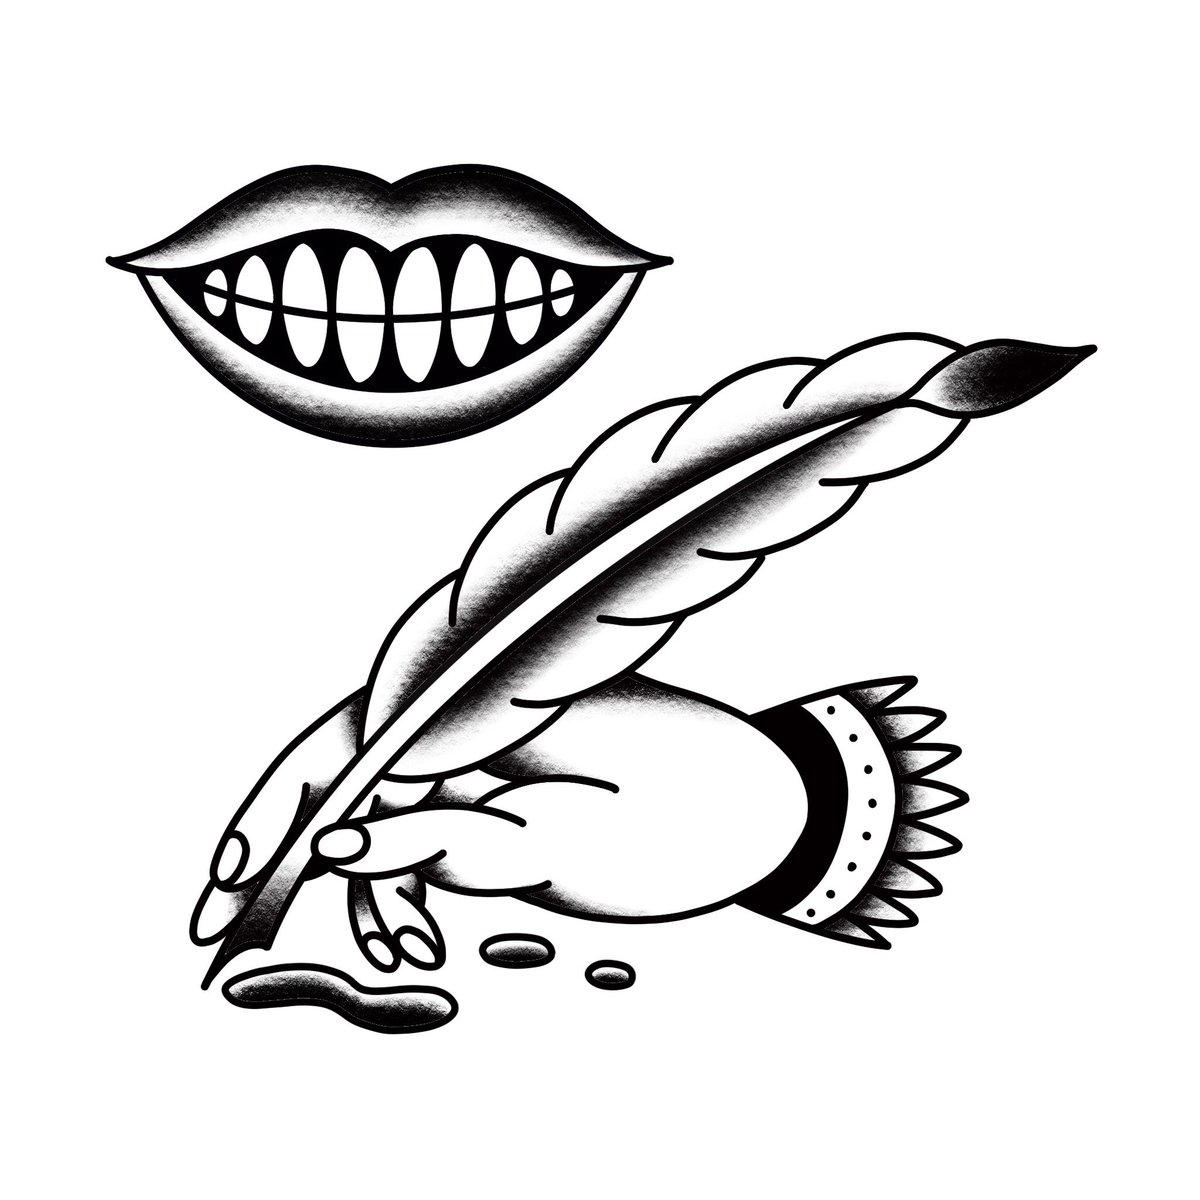 Based on “Will You Smile Again For Me” by …And You Will Know Us by the Trail of Dead
-
#inktober #inktober2022 #tattoo #tattooart #tattooflash #traditional #traditionaltattoo #andyouwillknowusbythetrailofdead
-